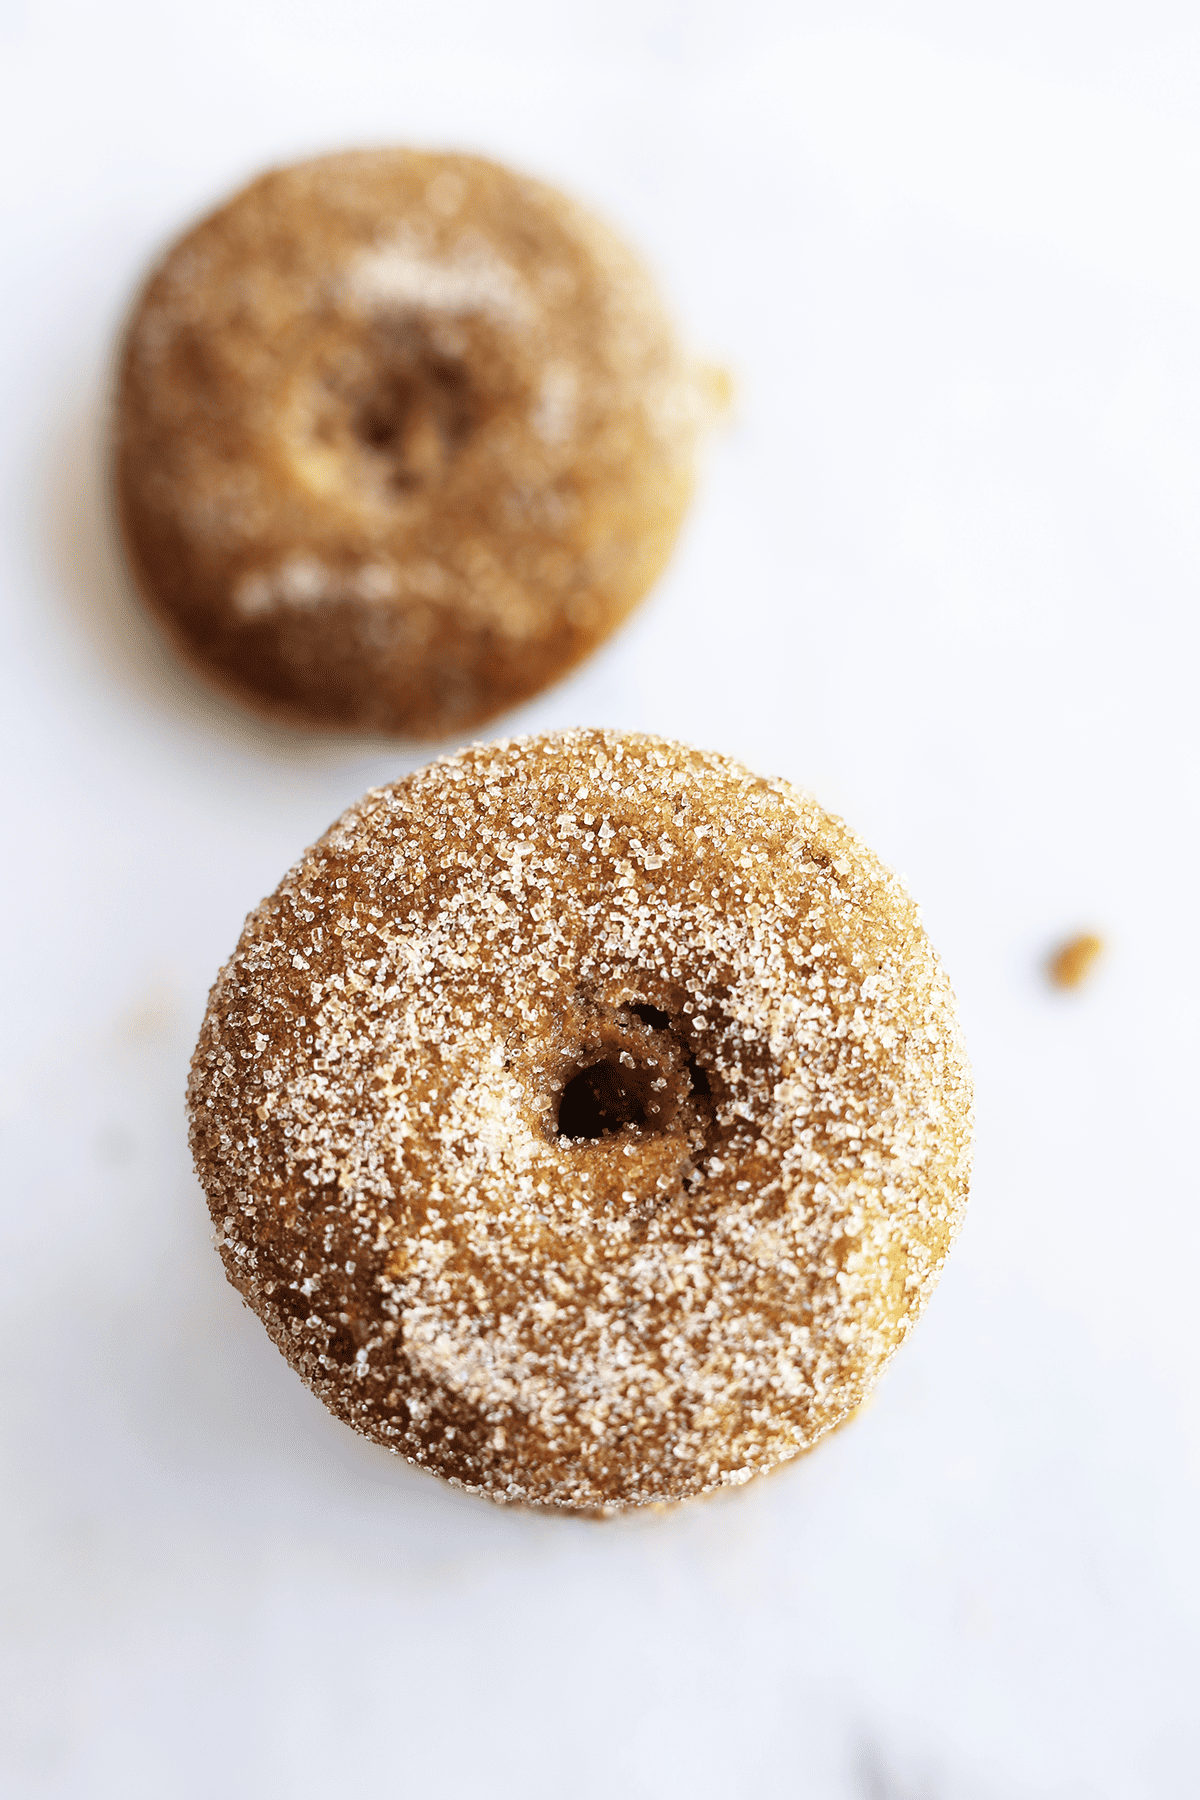 These homemade baked Apple Cider Donuts are vegan and sure easy plus delicious! They are coated in cinnamon sugar and sure to make the house smell amazing.